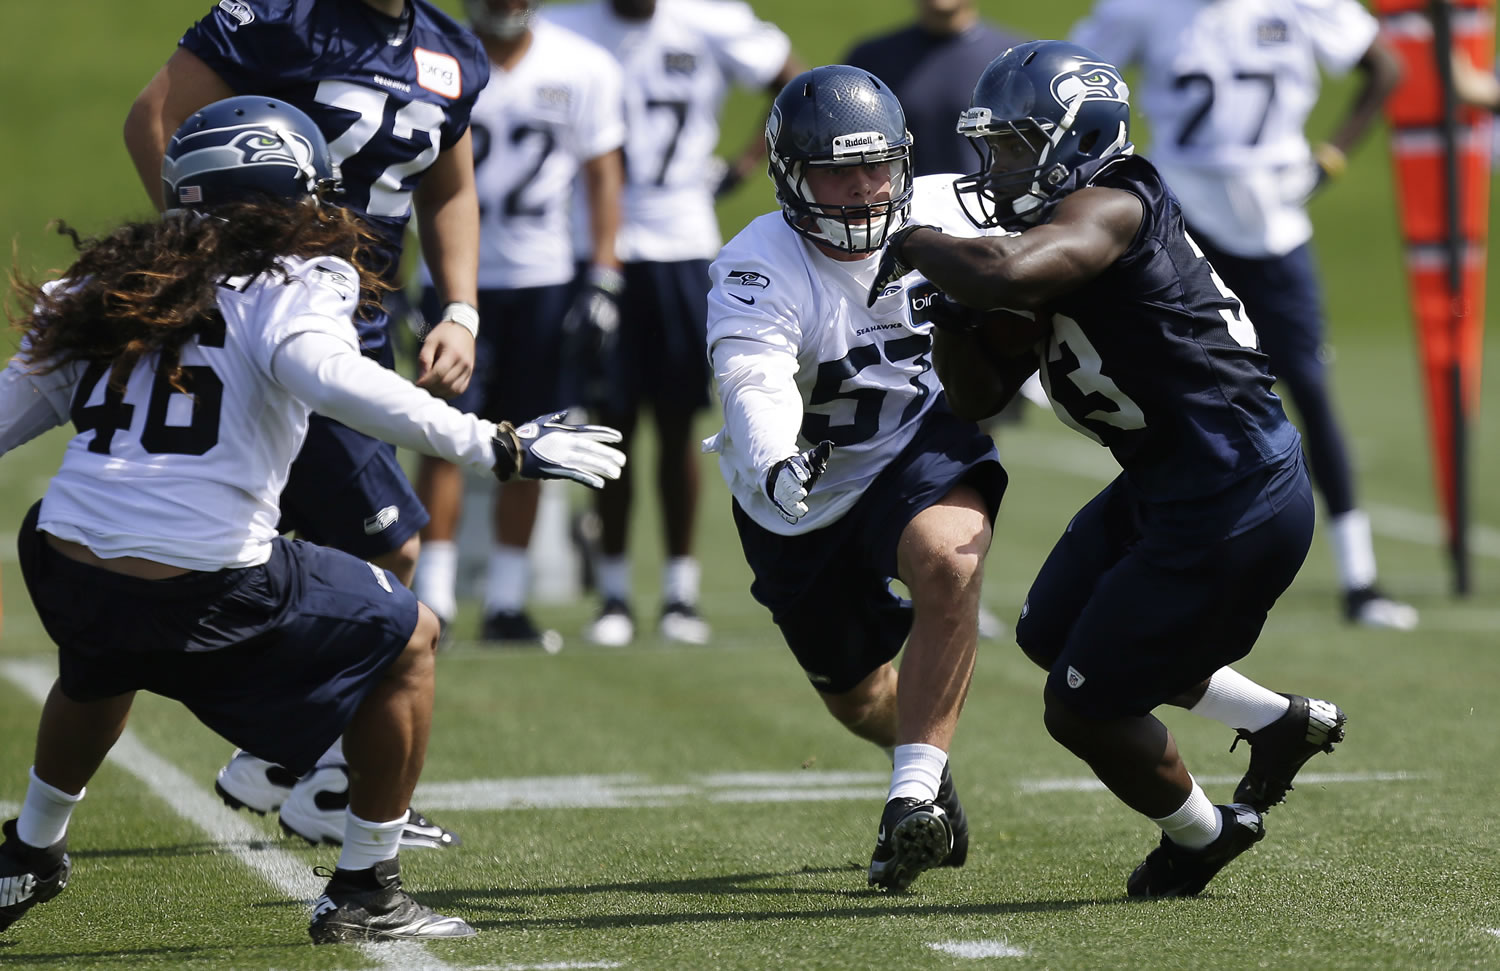 Seattle Seahawks top draft pick, running back Christine Michael, right, tries to avoid the defense of Seahawks' John Lotulelei, left, and Jaydan Bird, second from right, during practice drills Friday.